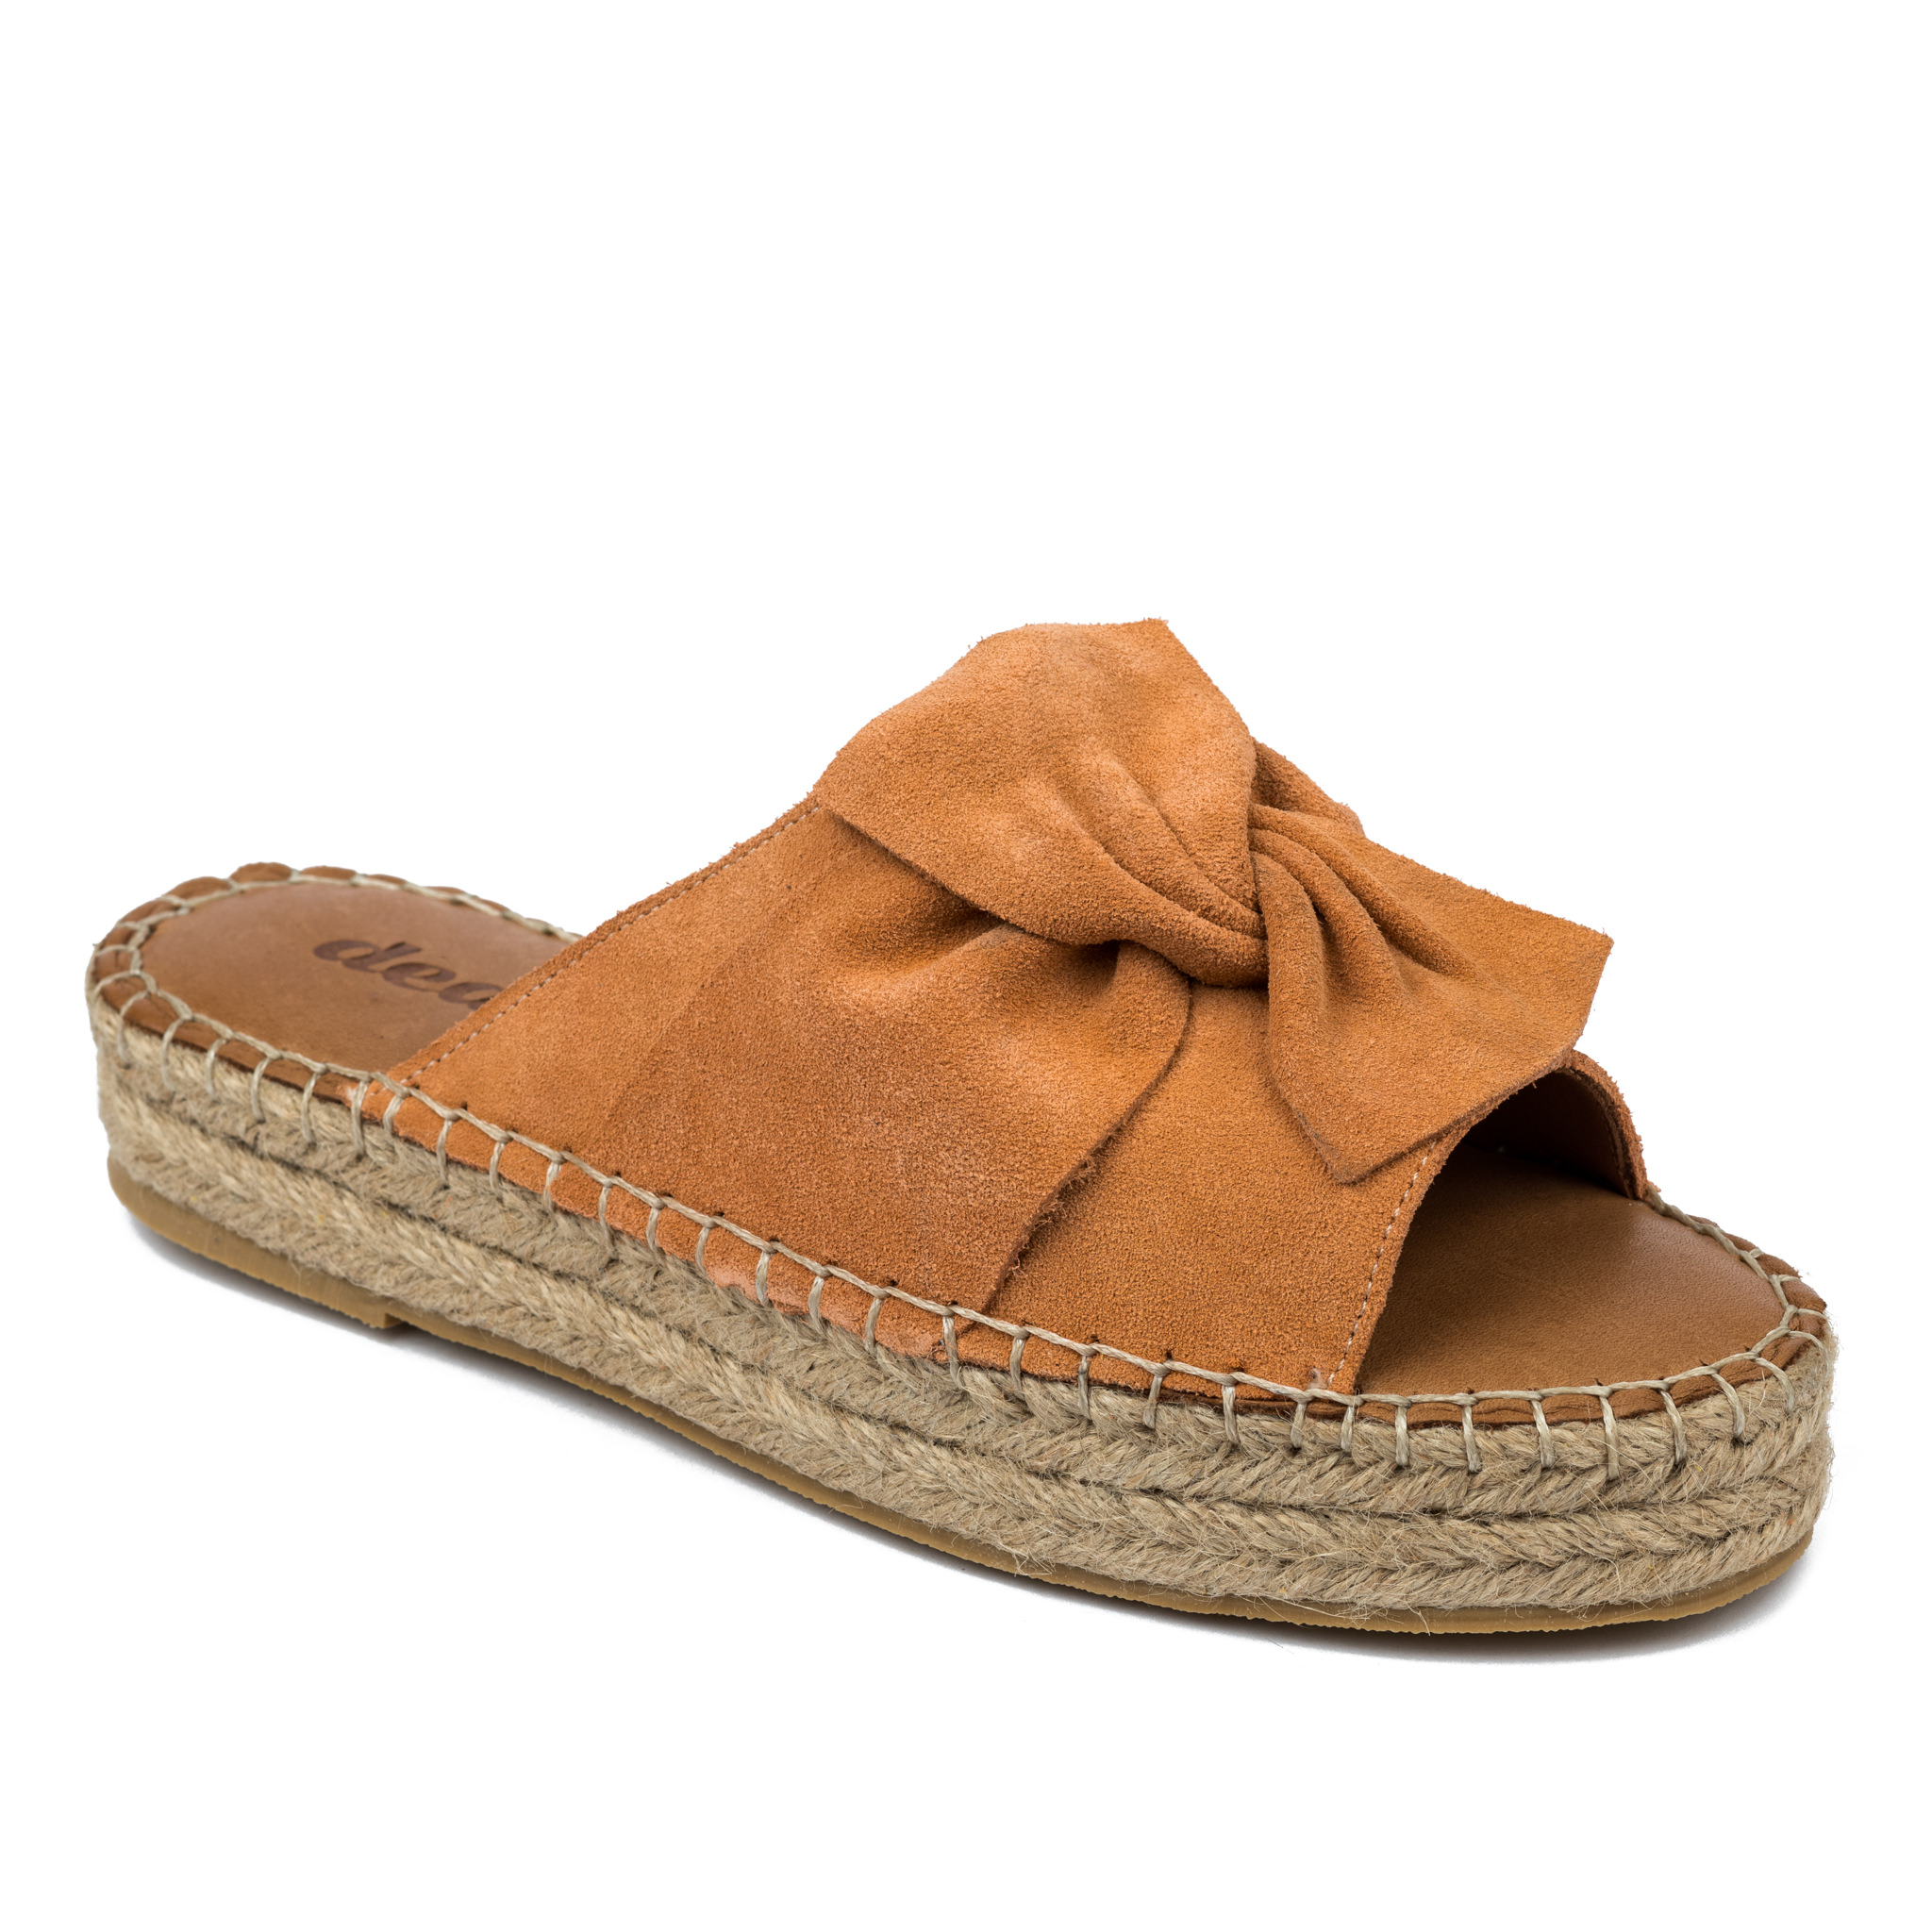 Leather slippers A658 - ORANGE